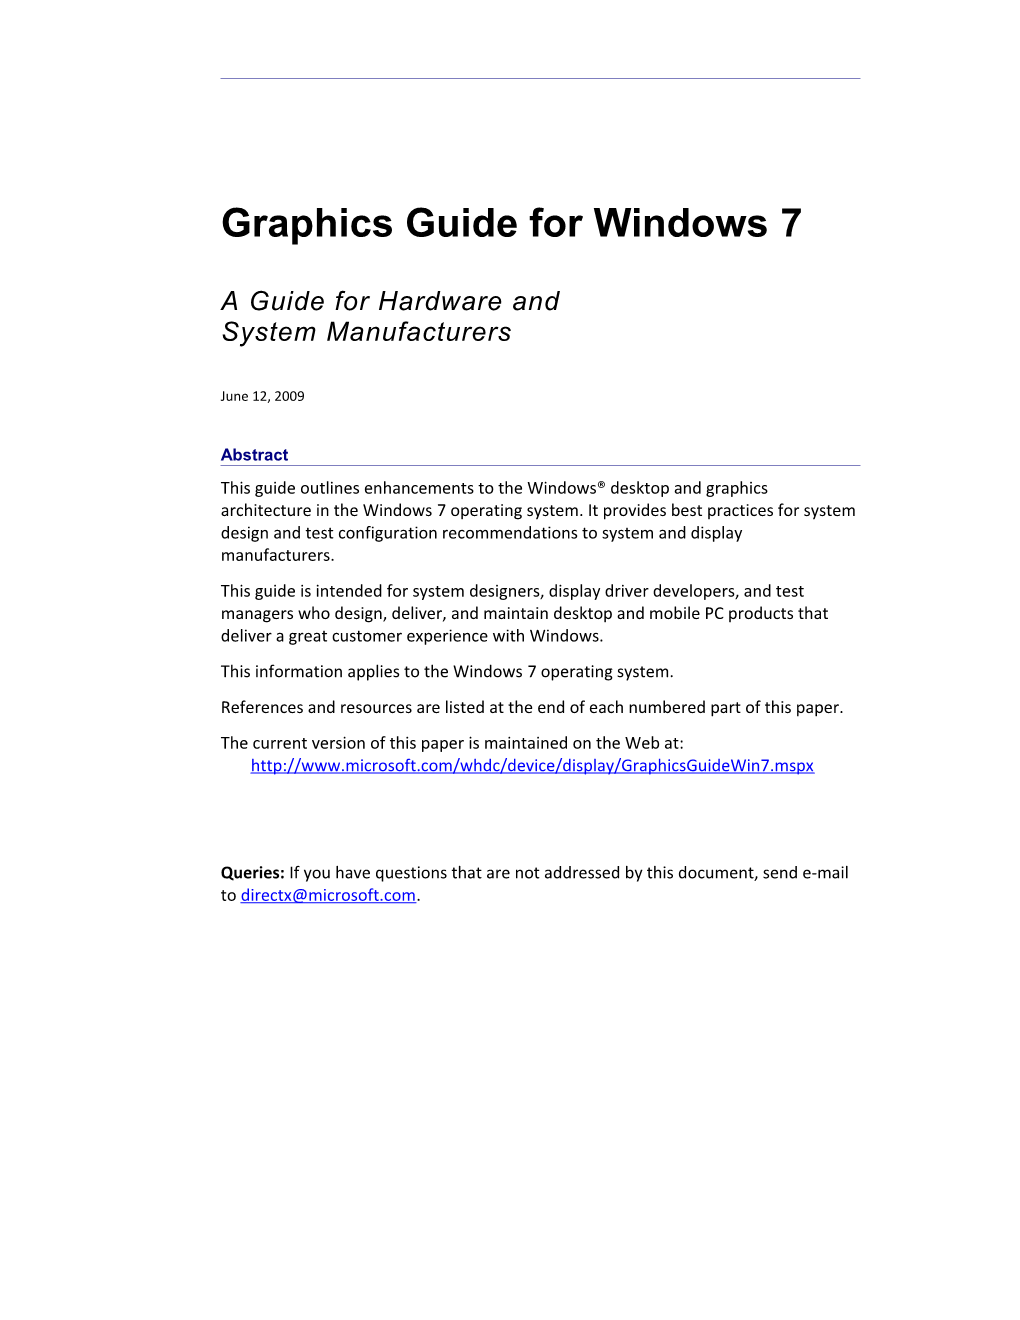 Graphics Guide for Windows 7 2